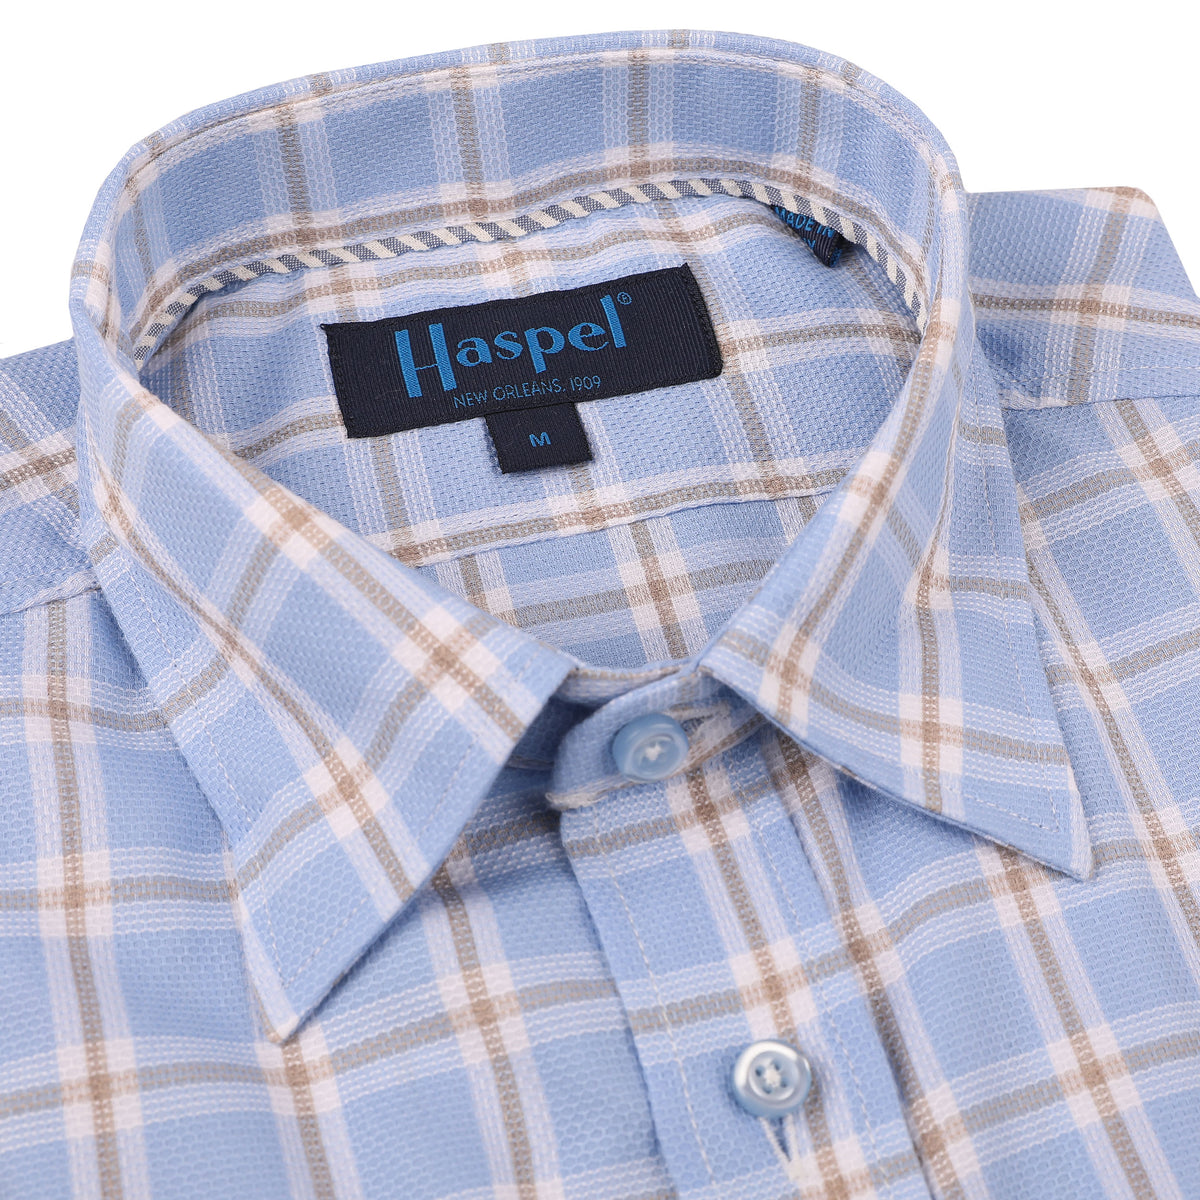 The Treme Light Blue Texture with Tan Check is a timeless design that will instantly upgrade your look. Crafted with a light blue texture and tan check pattern, this piece will be your go-to for special occasions. Perfect for adding a touch of sophistication to your wardrobe.  100% Cotton • Hidden Button Collar • Long Sleeve • Chest Pocket • Machine Washable • Made in Italy • Return Policy